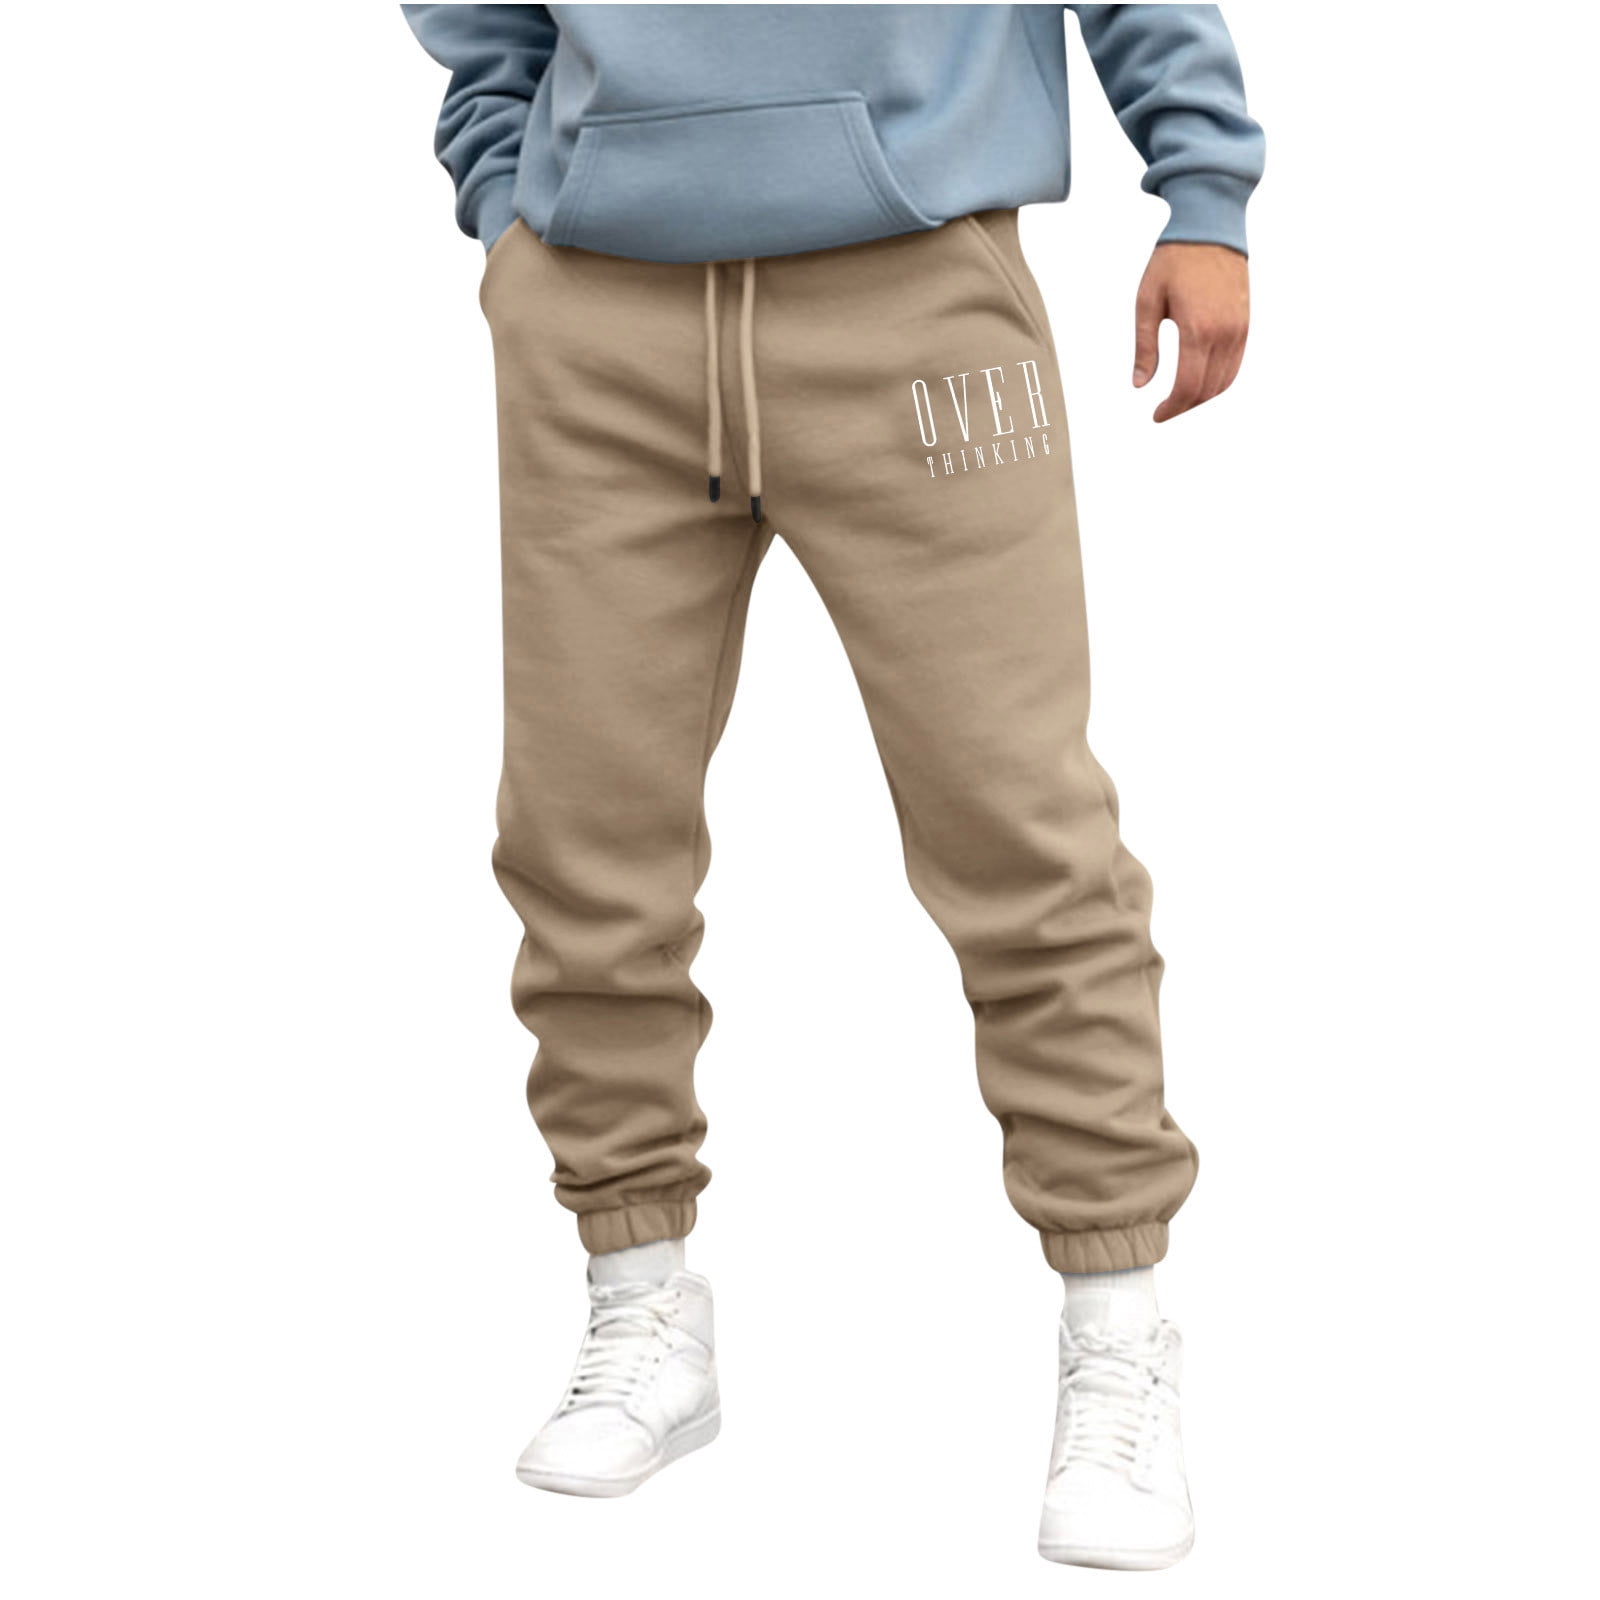 Tawop Big and Tall Pants for Men with Pocket Solid Color Sport Sweat ...